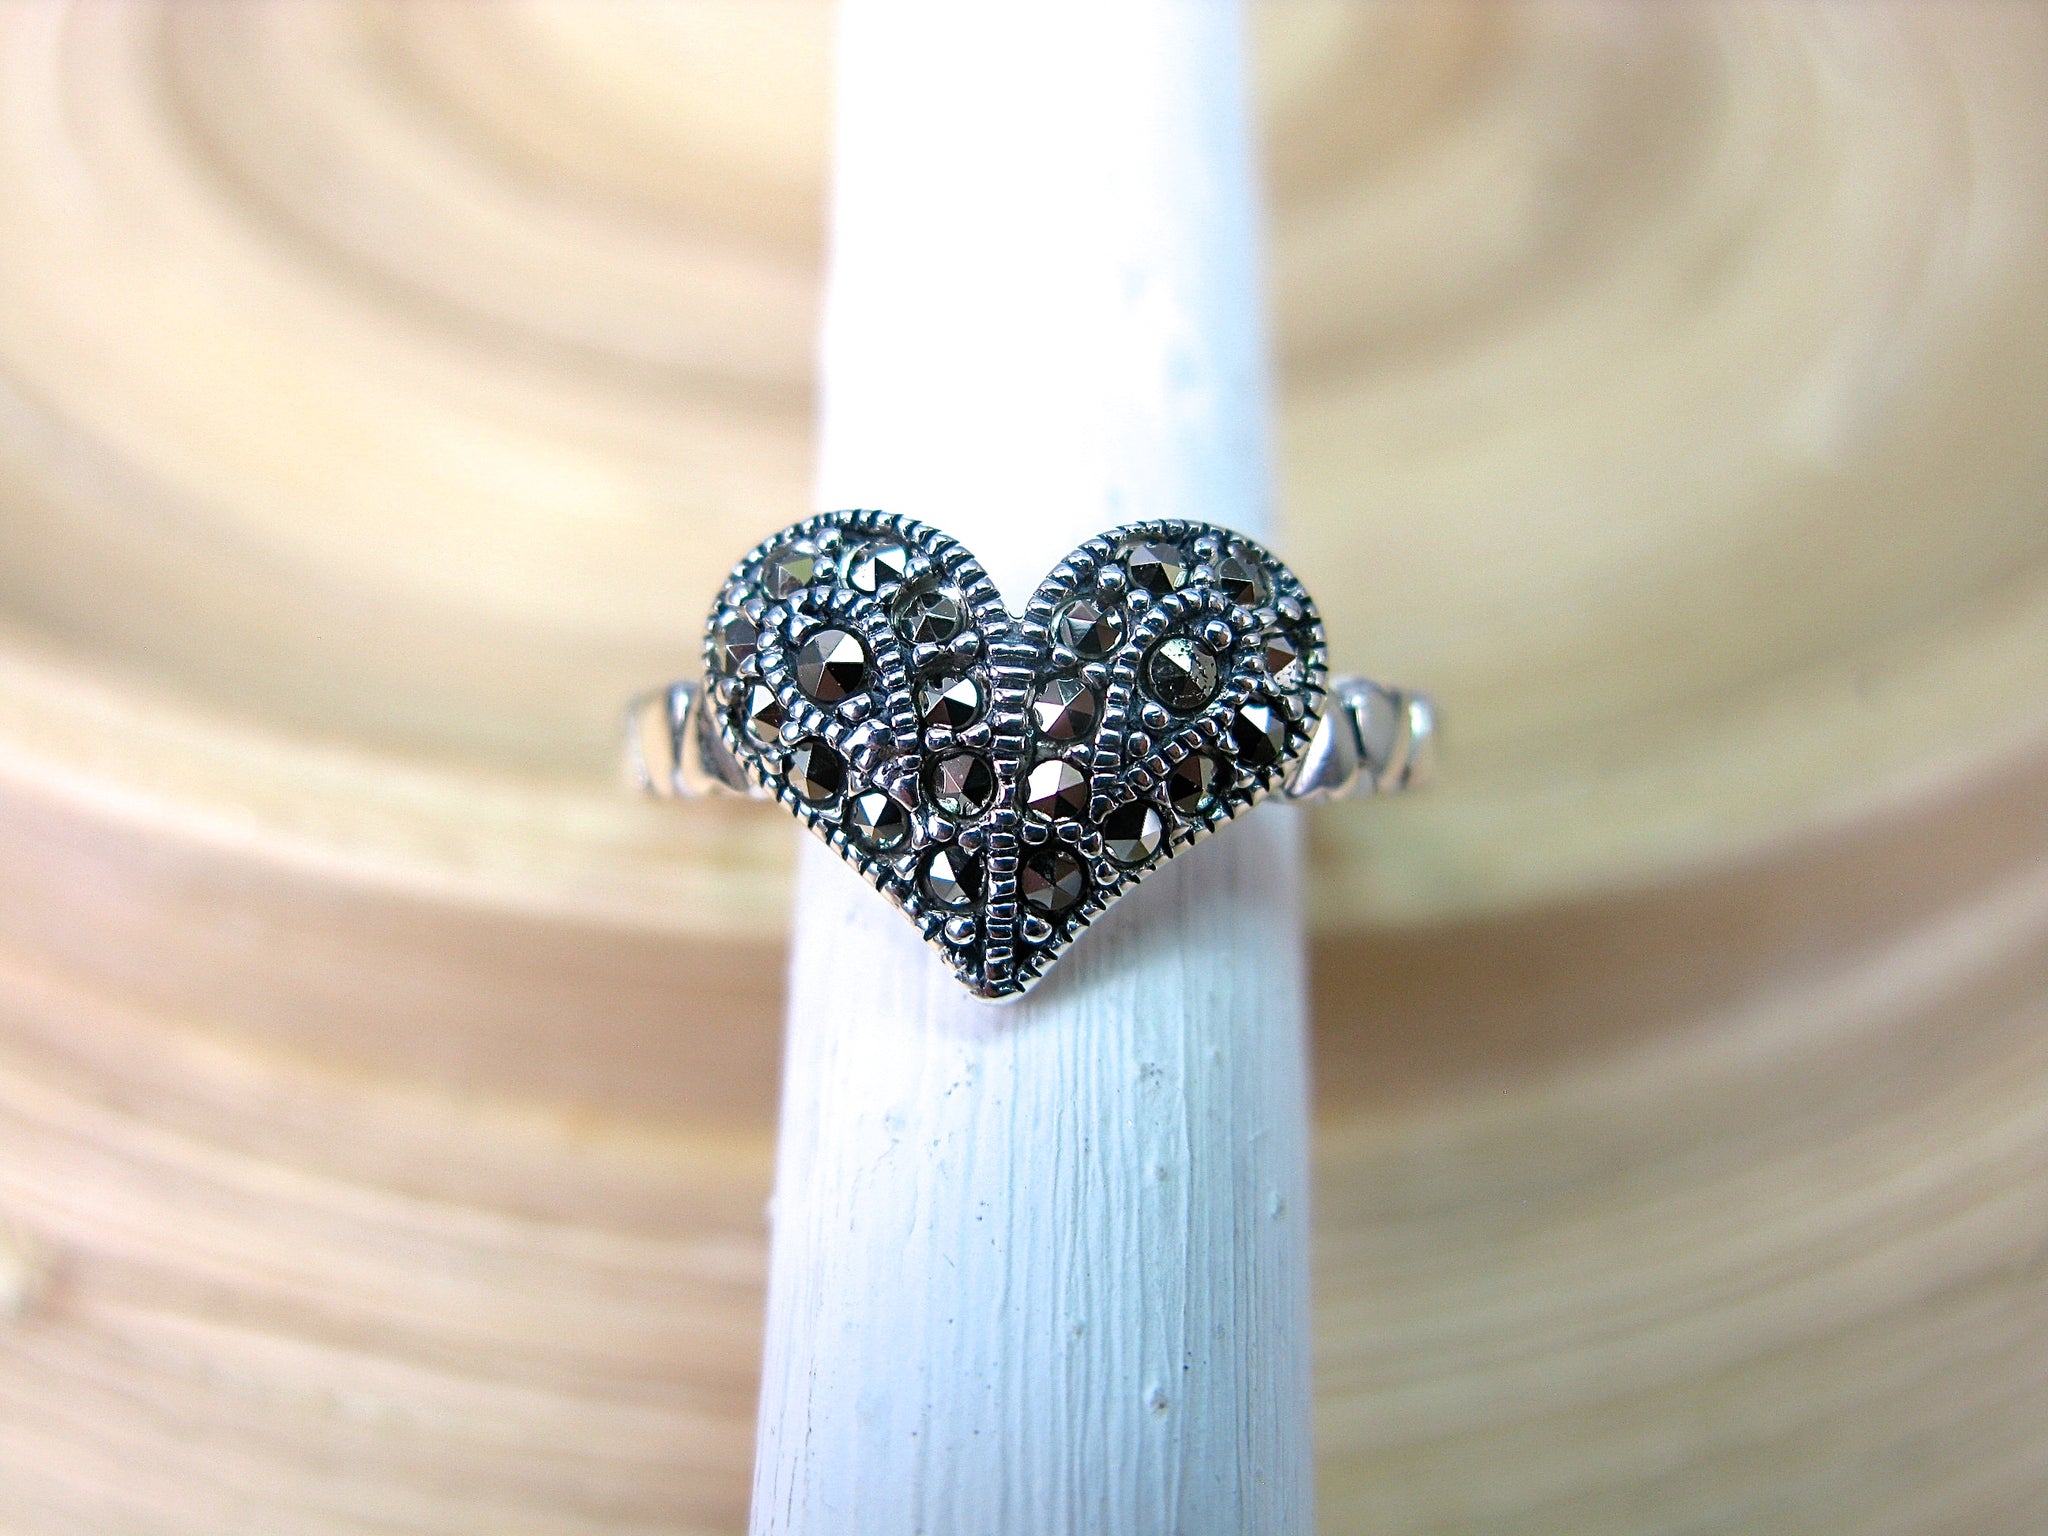 Marcasite Heart Ring in 925 Sterling Silver